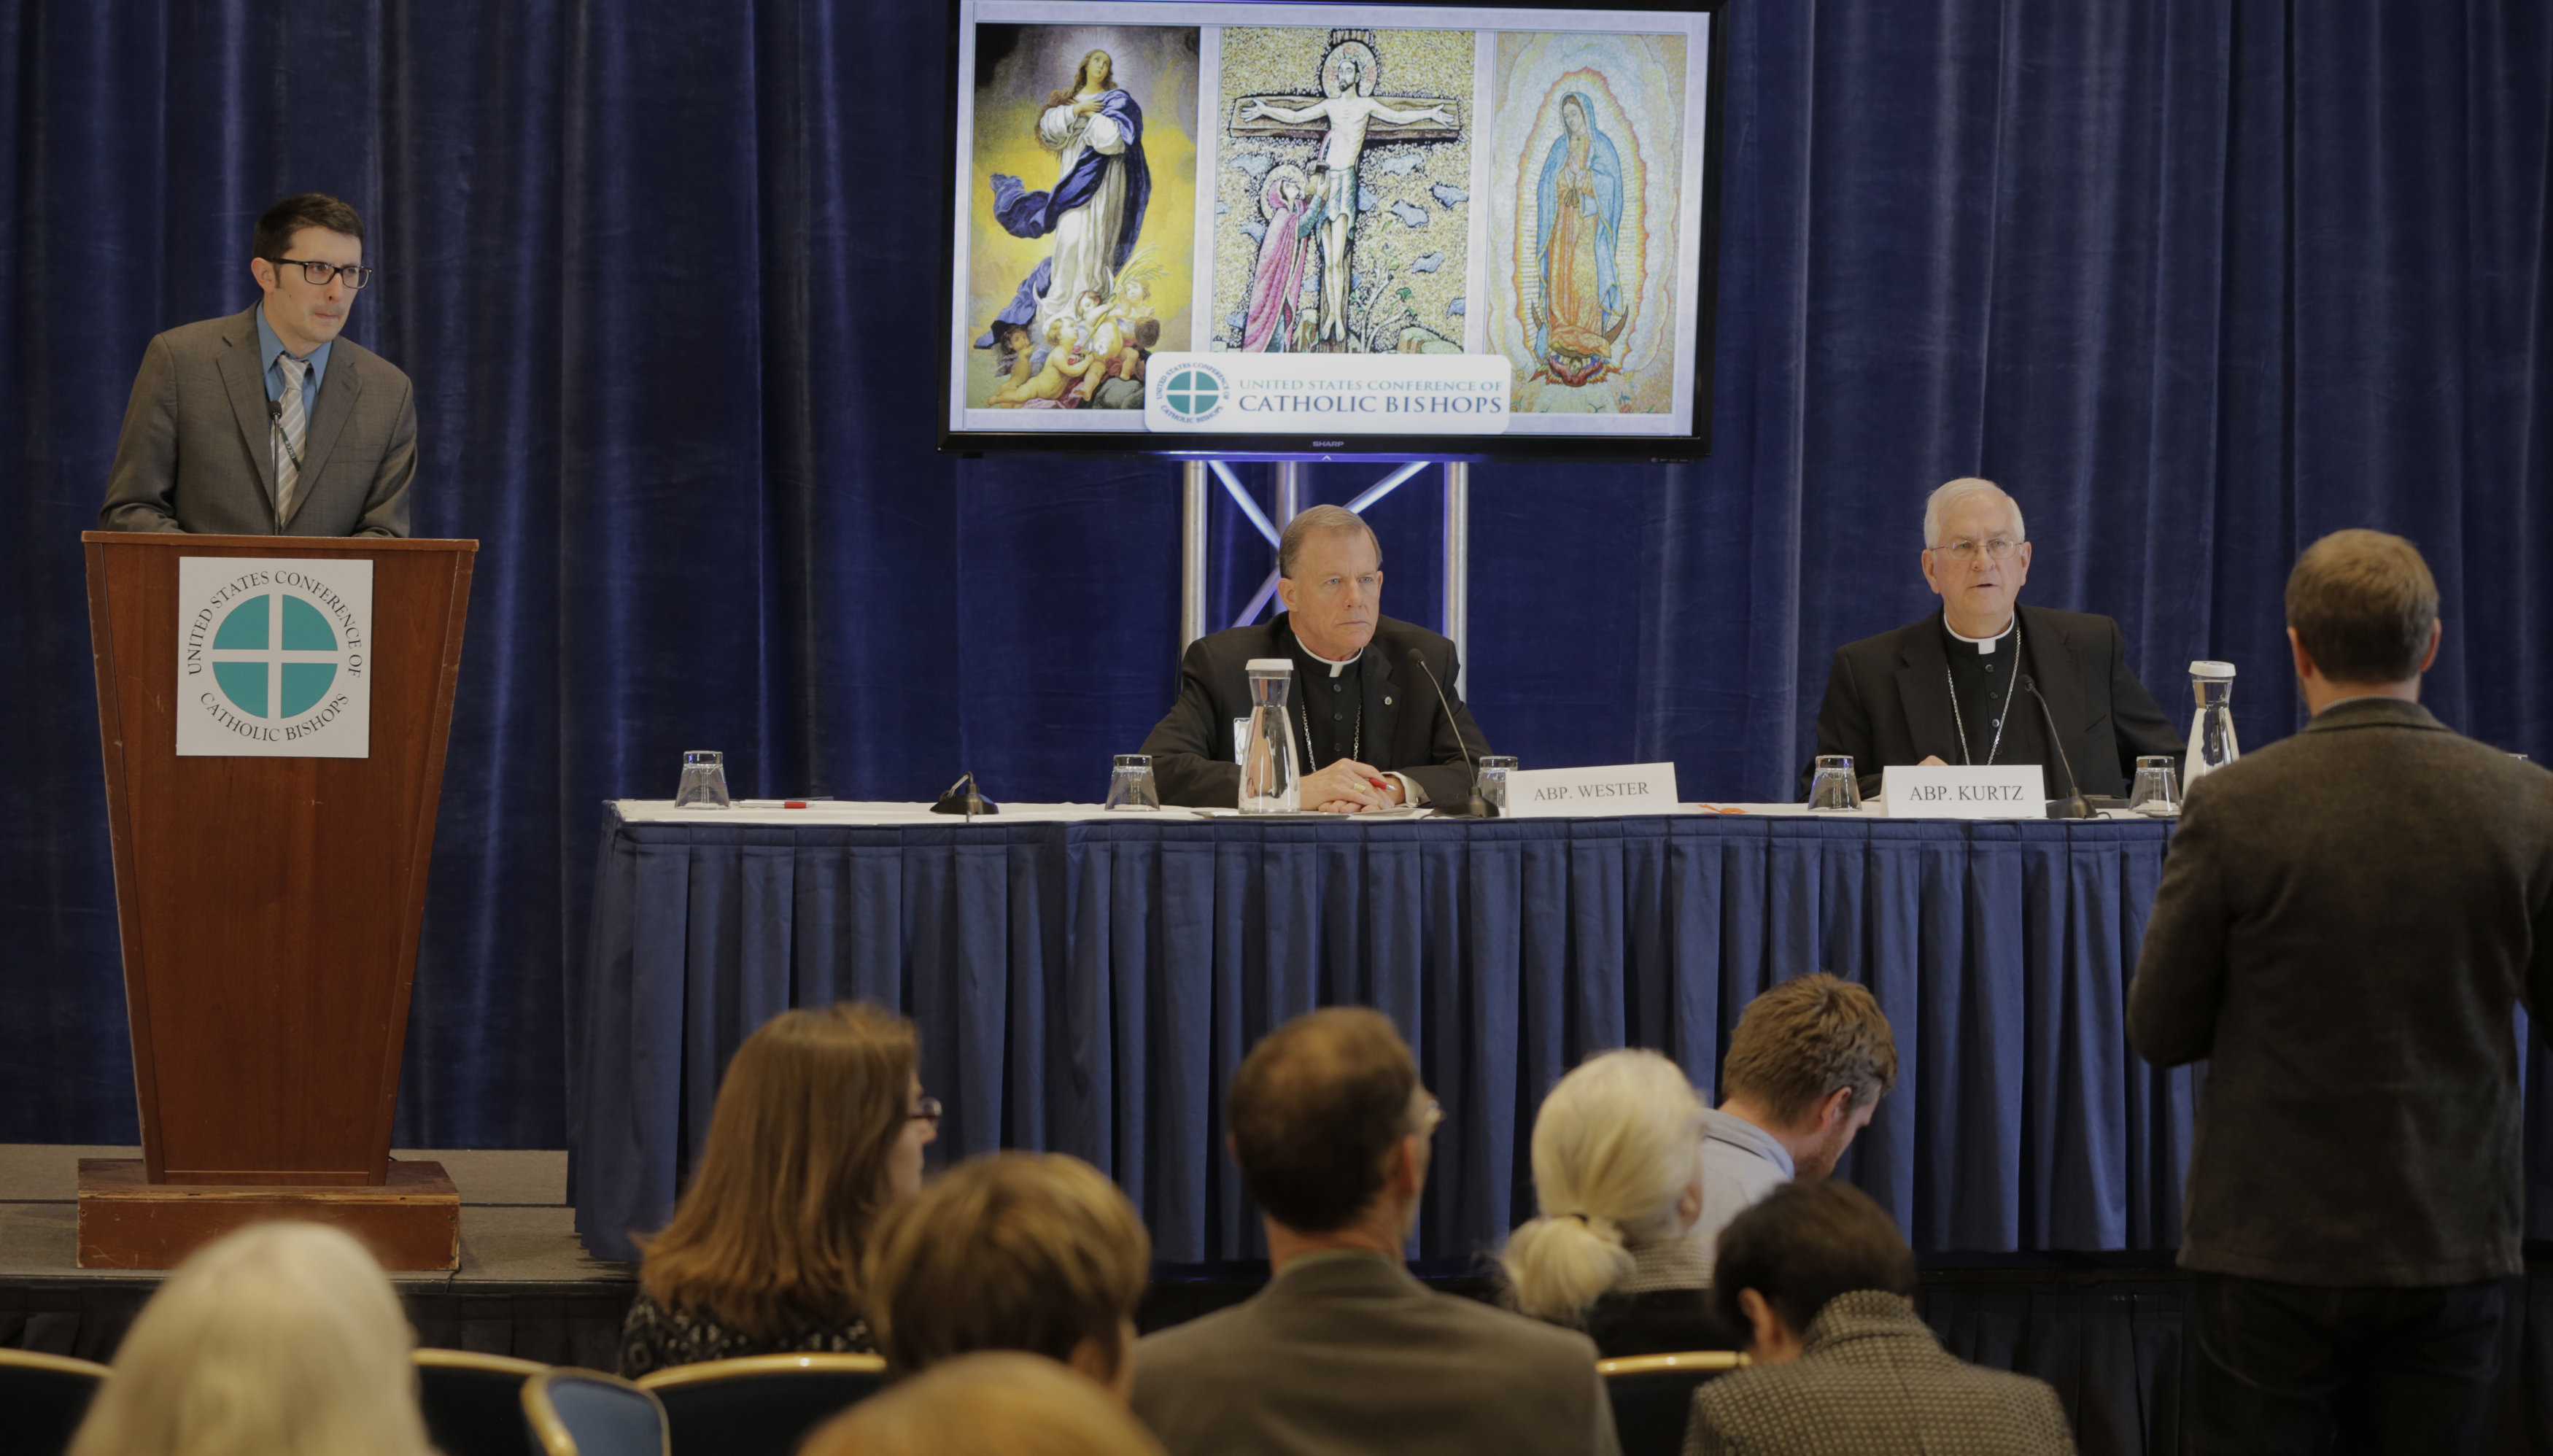 A reporter asks a question Nov. 16 during a news conference at the 2015 fall general assembly of the U.S. Conference of Catholic Bishops in Baltimore. Pictured are Don Clemmer, USCCB assistant director of media relations, Archbishop John C. Wester of Santa Fe, N.M., and USCCB president, Archbishop Joseph E. Kurtz of Louisville, Ky. (Photo © Bob Roller)